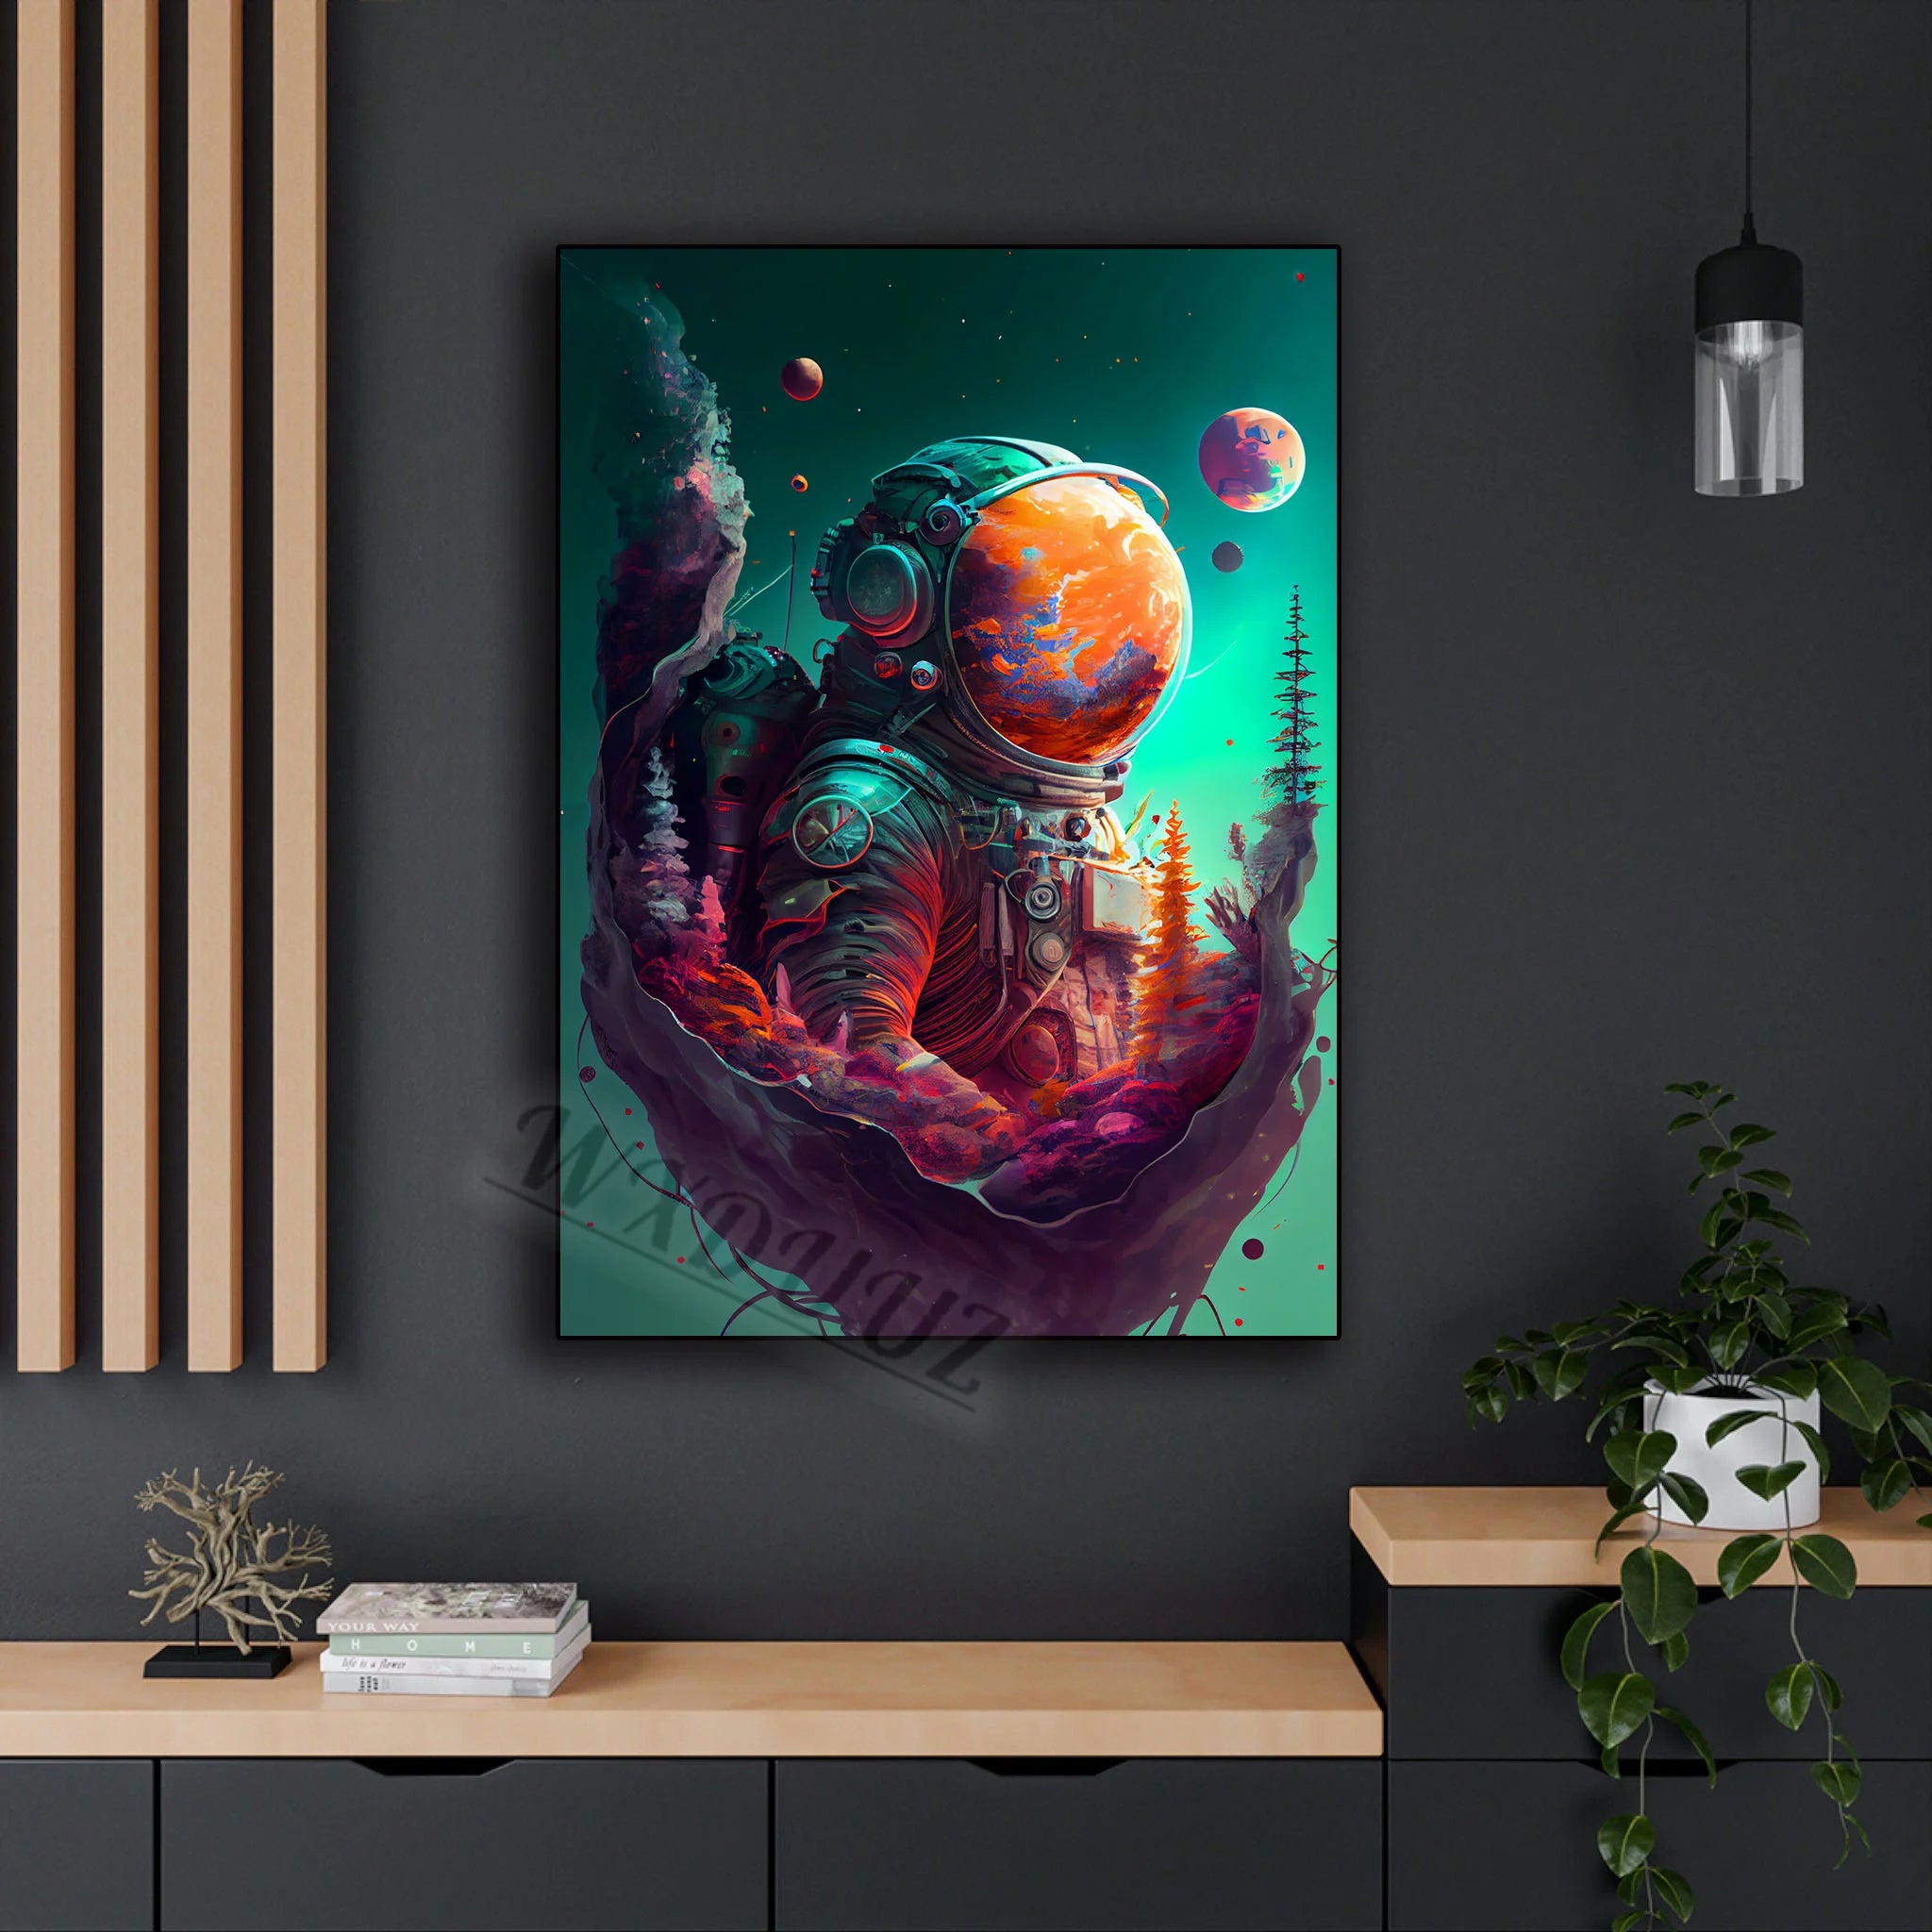 Space Astronaut Cyberpunk Nordic Game Watercolor Art I / 20x30cm No Framed